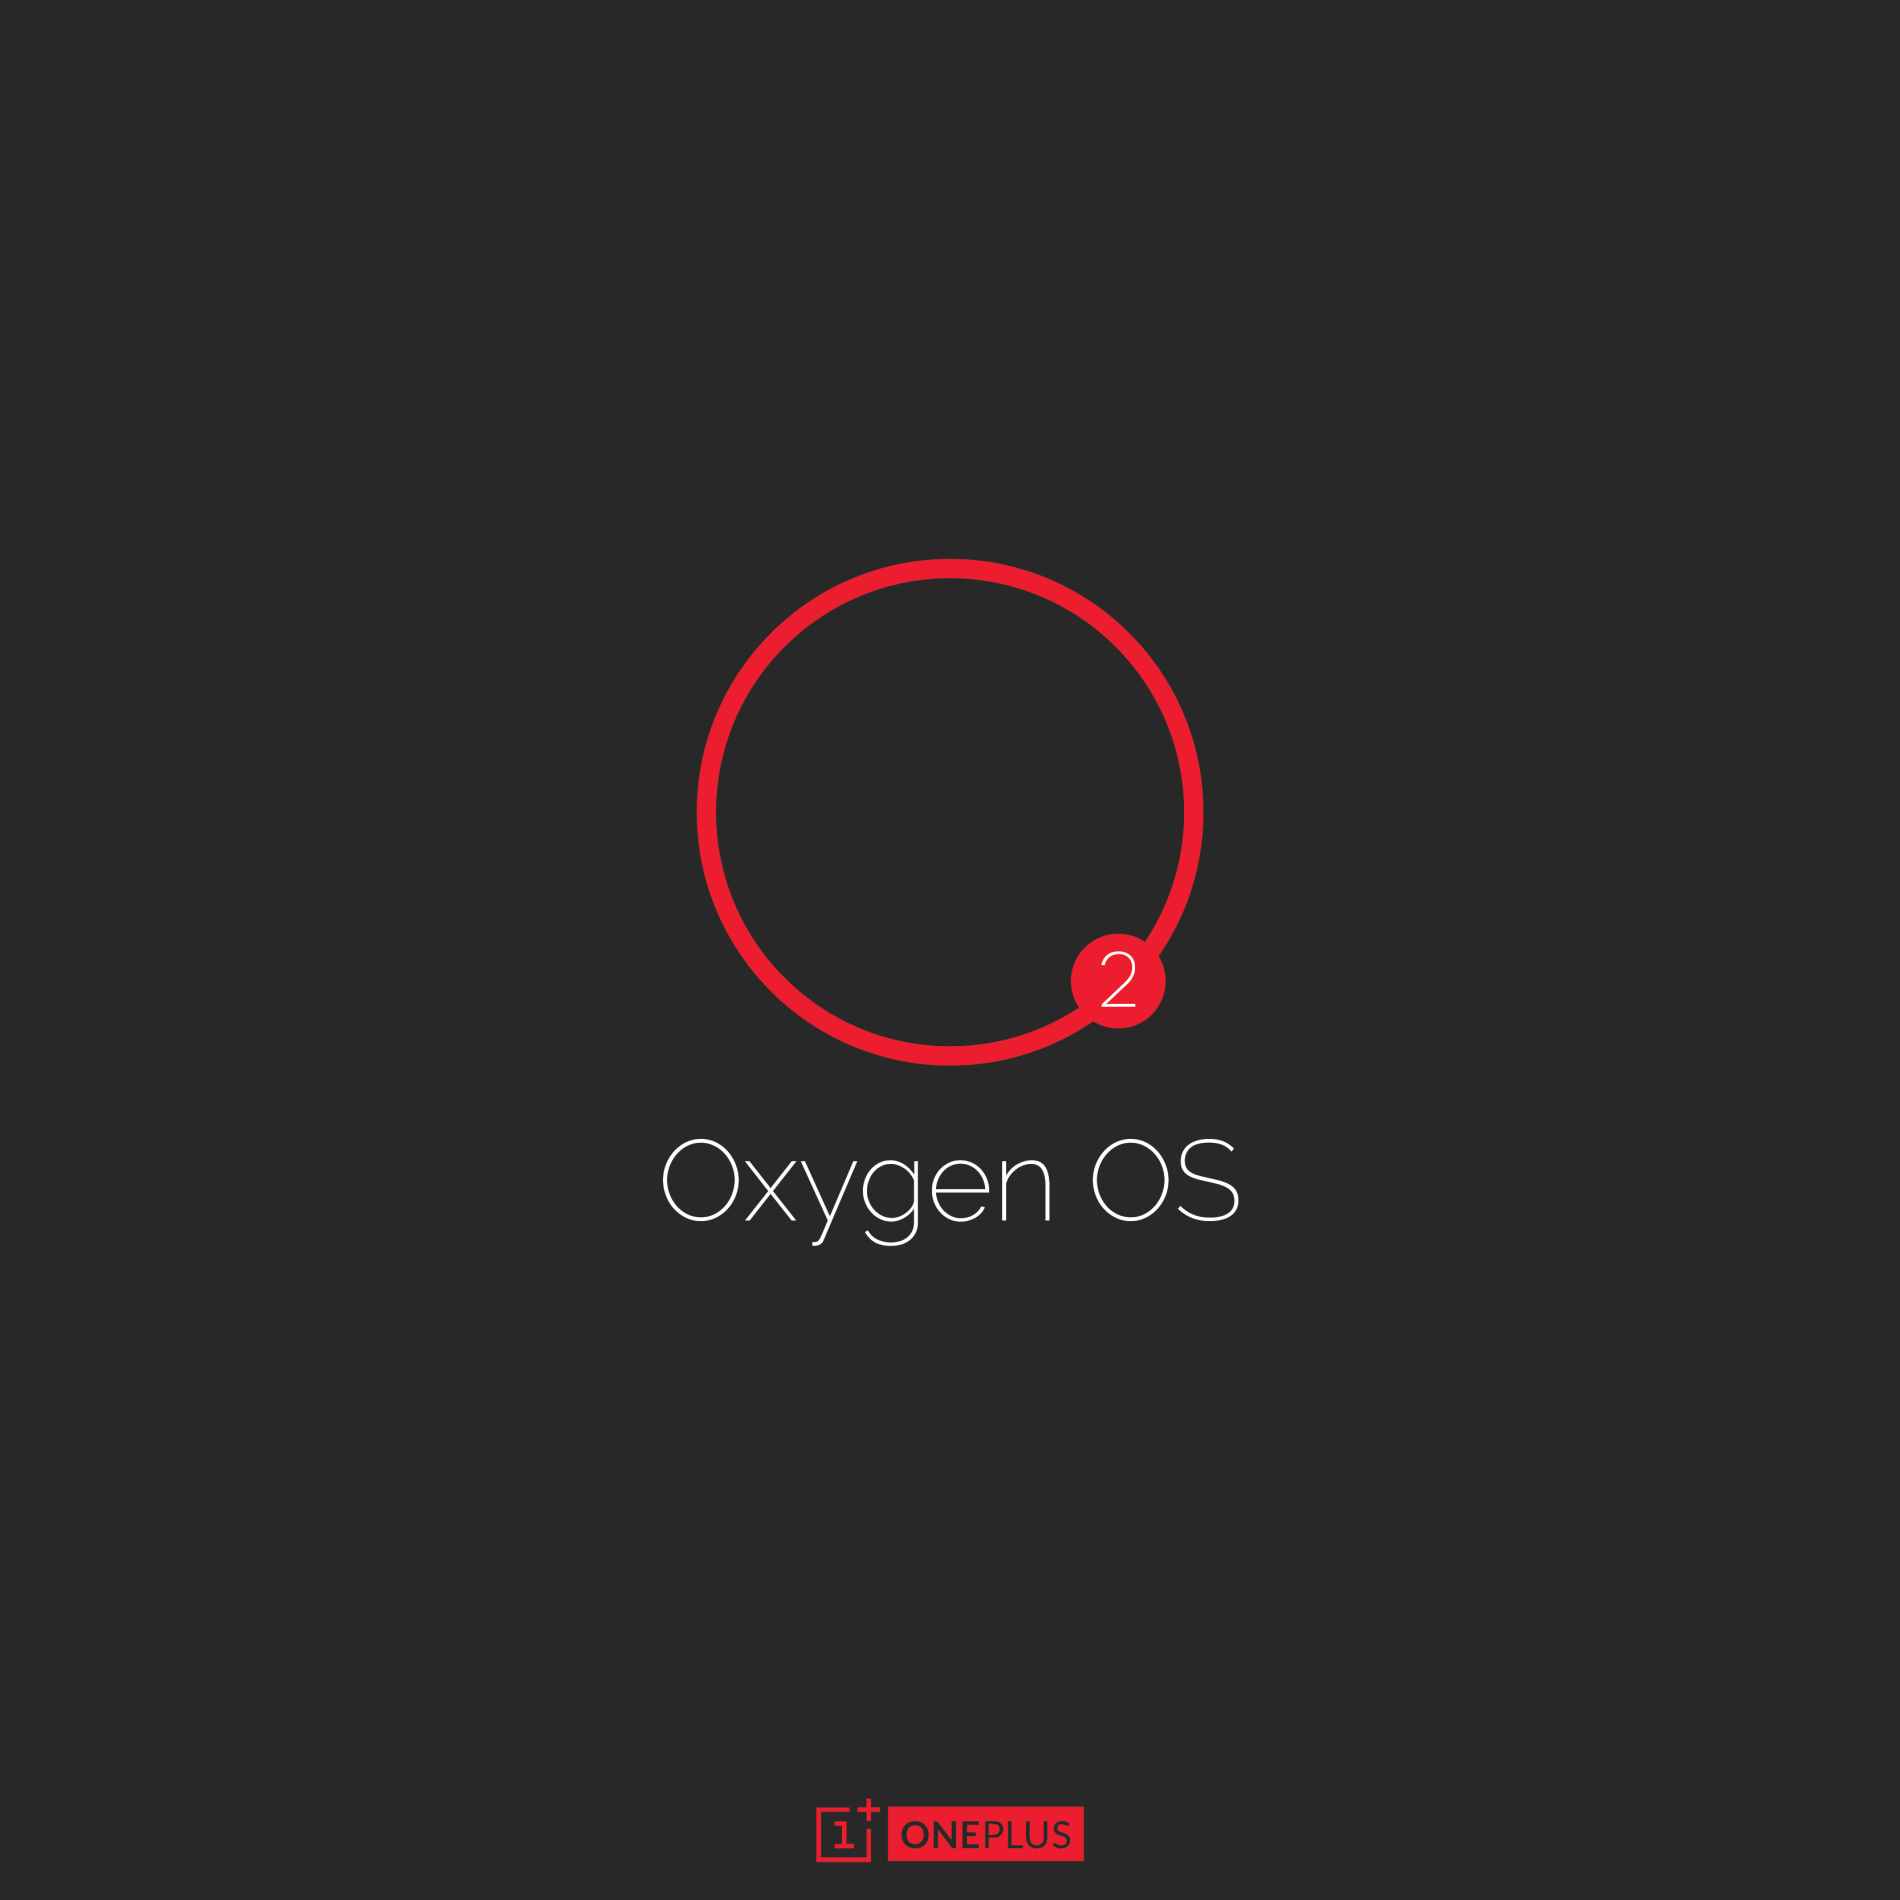 Download OnePlus One Oxygen OS Stock Wallpaper